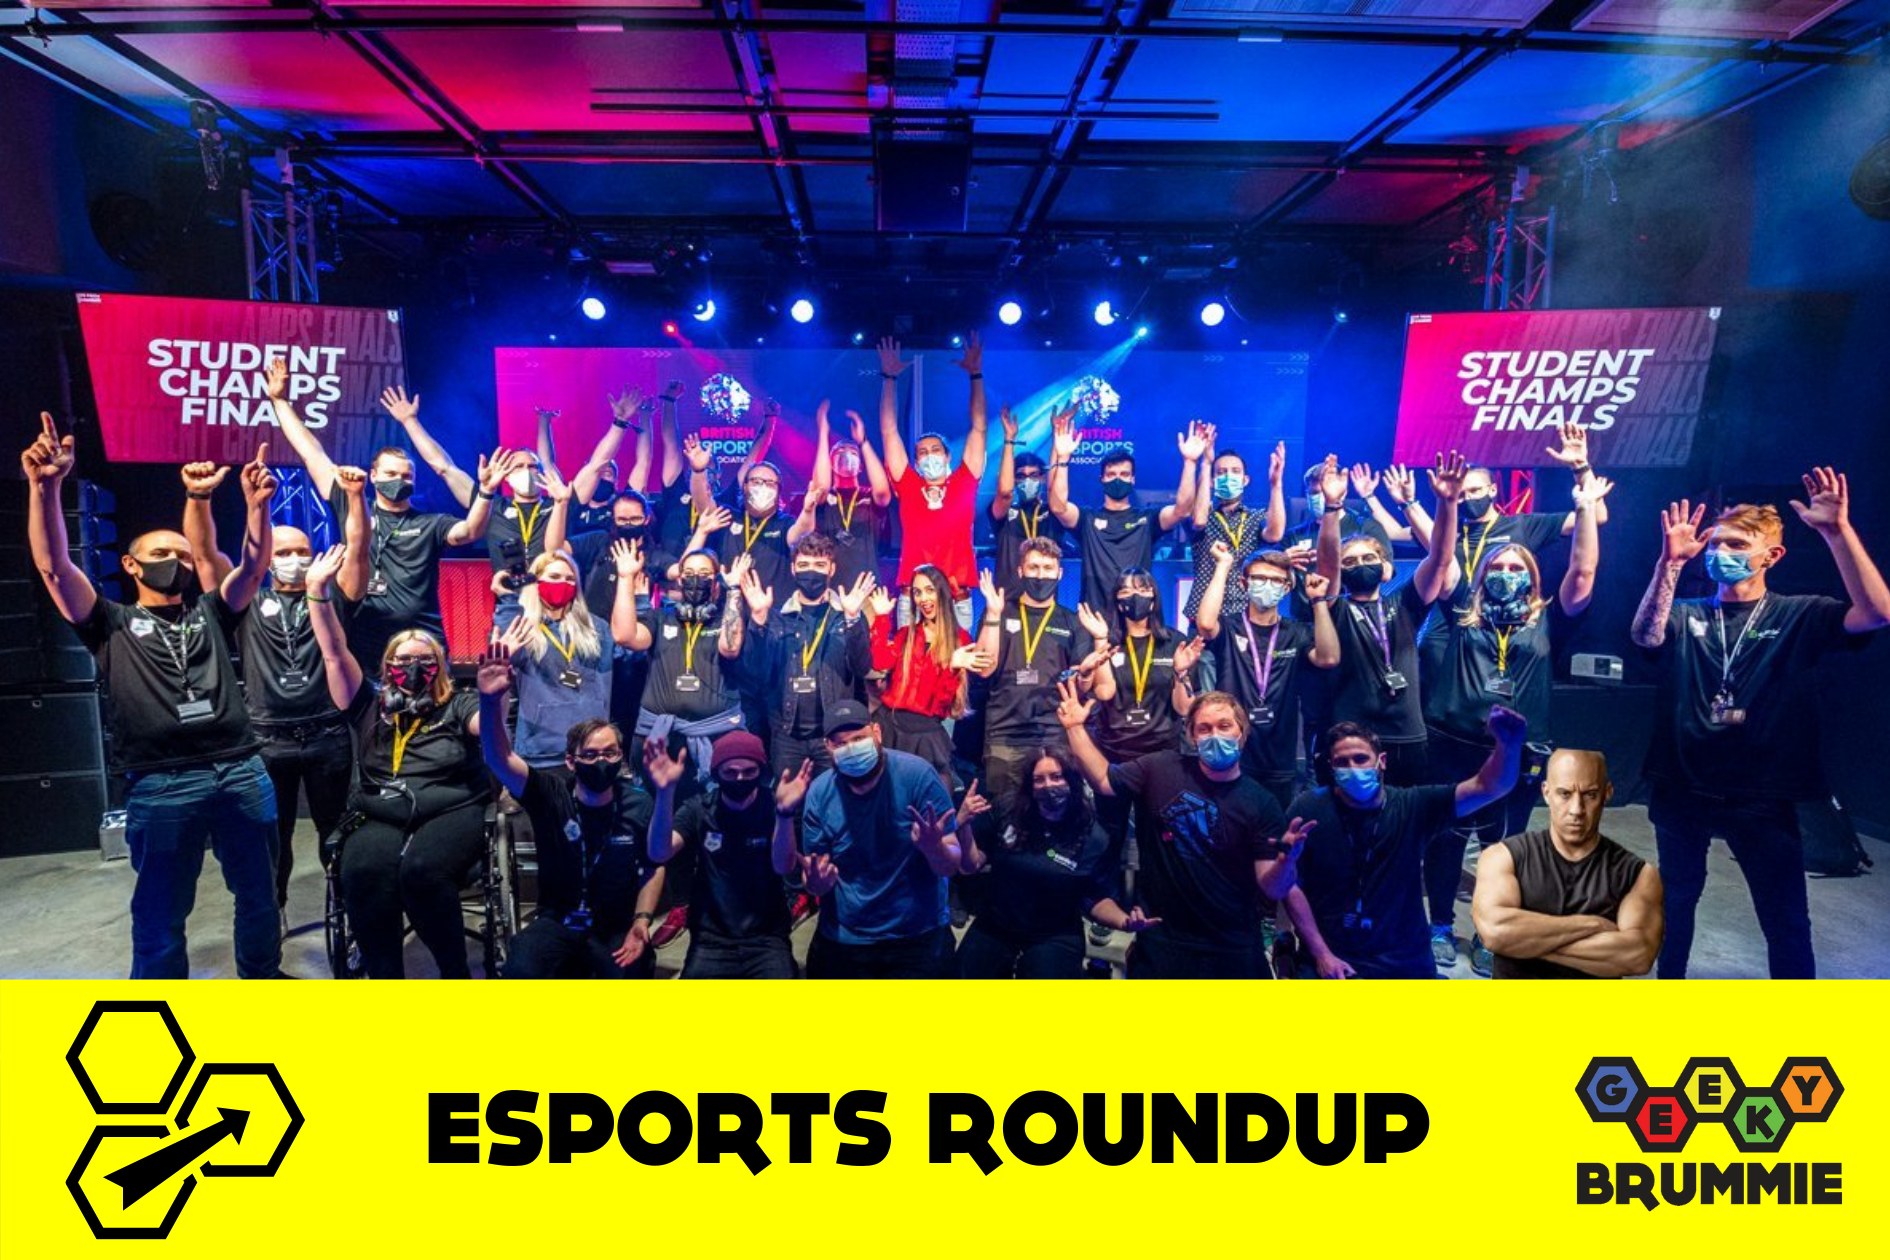 Esports Roundup: All about dem championships